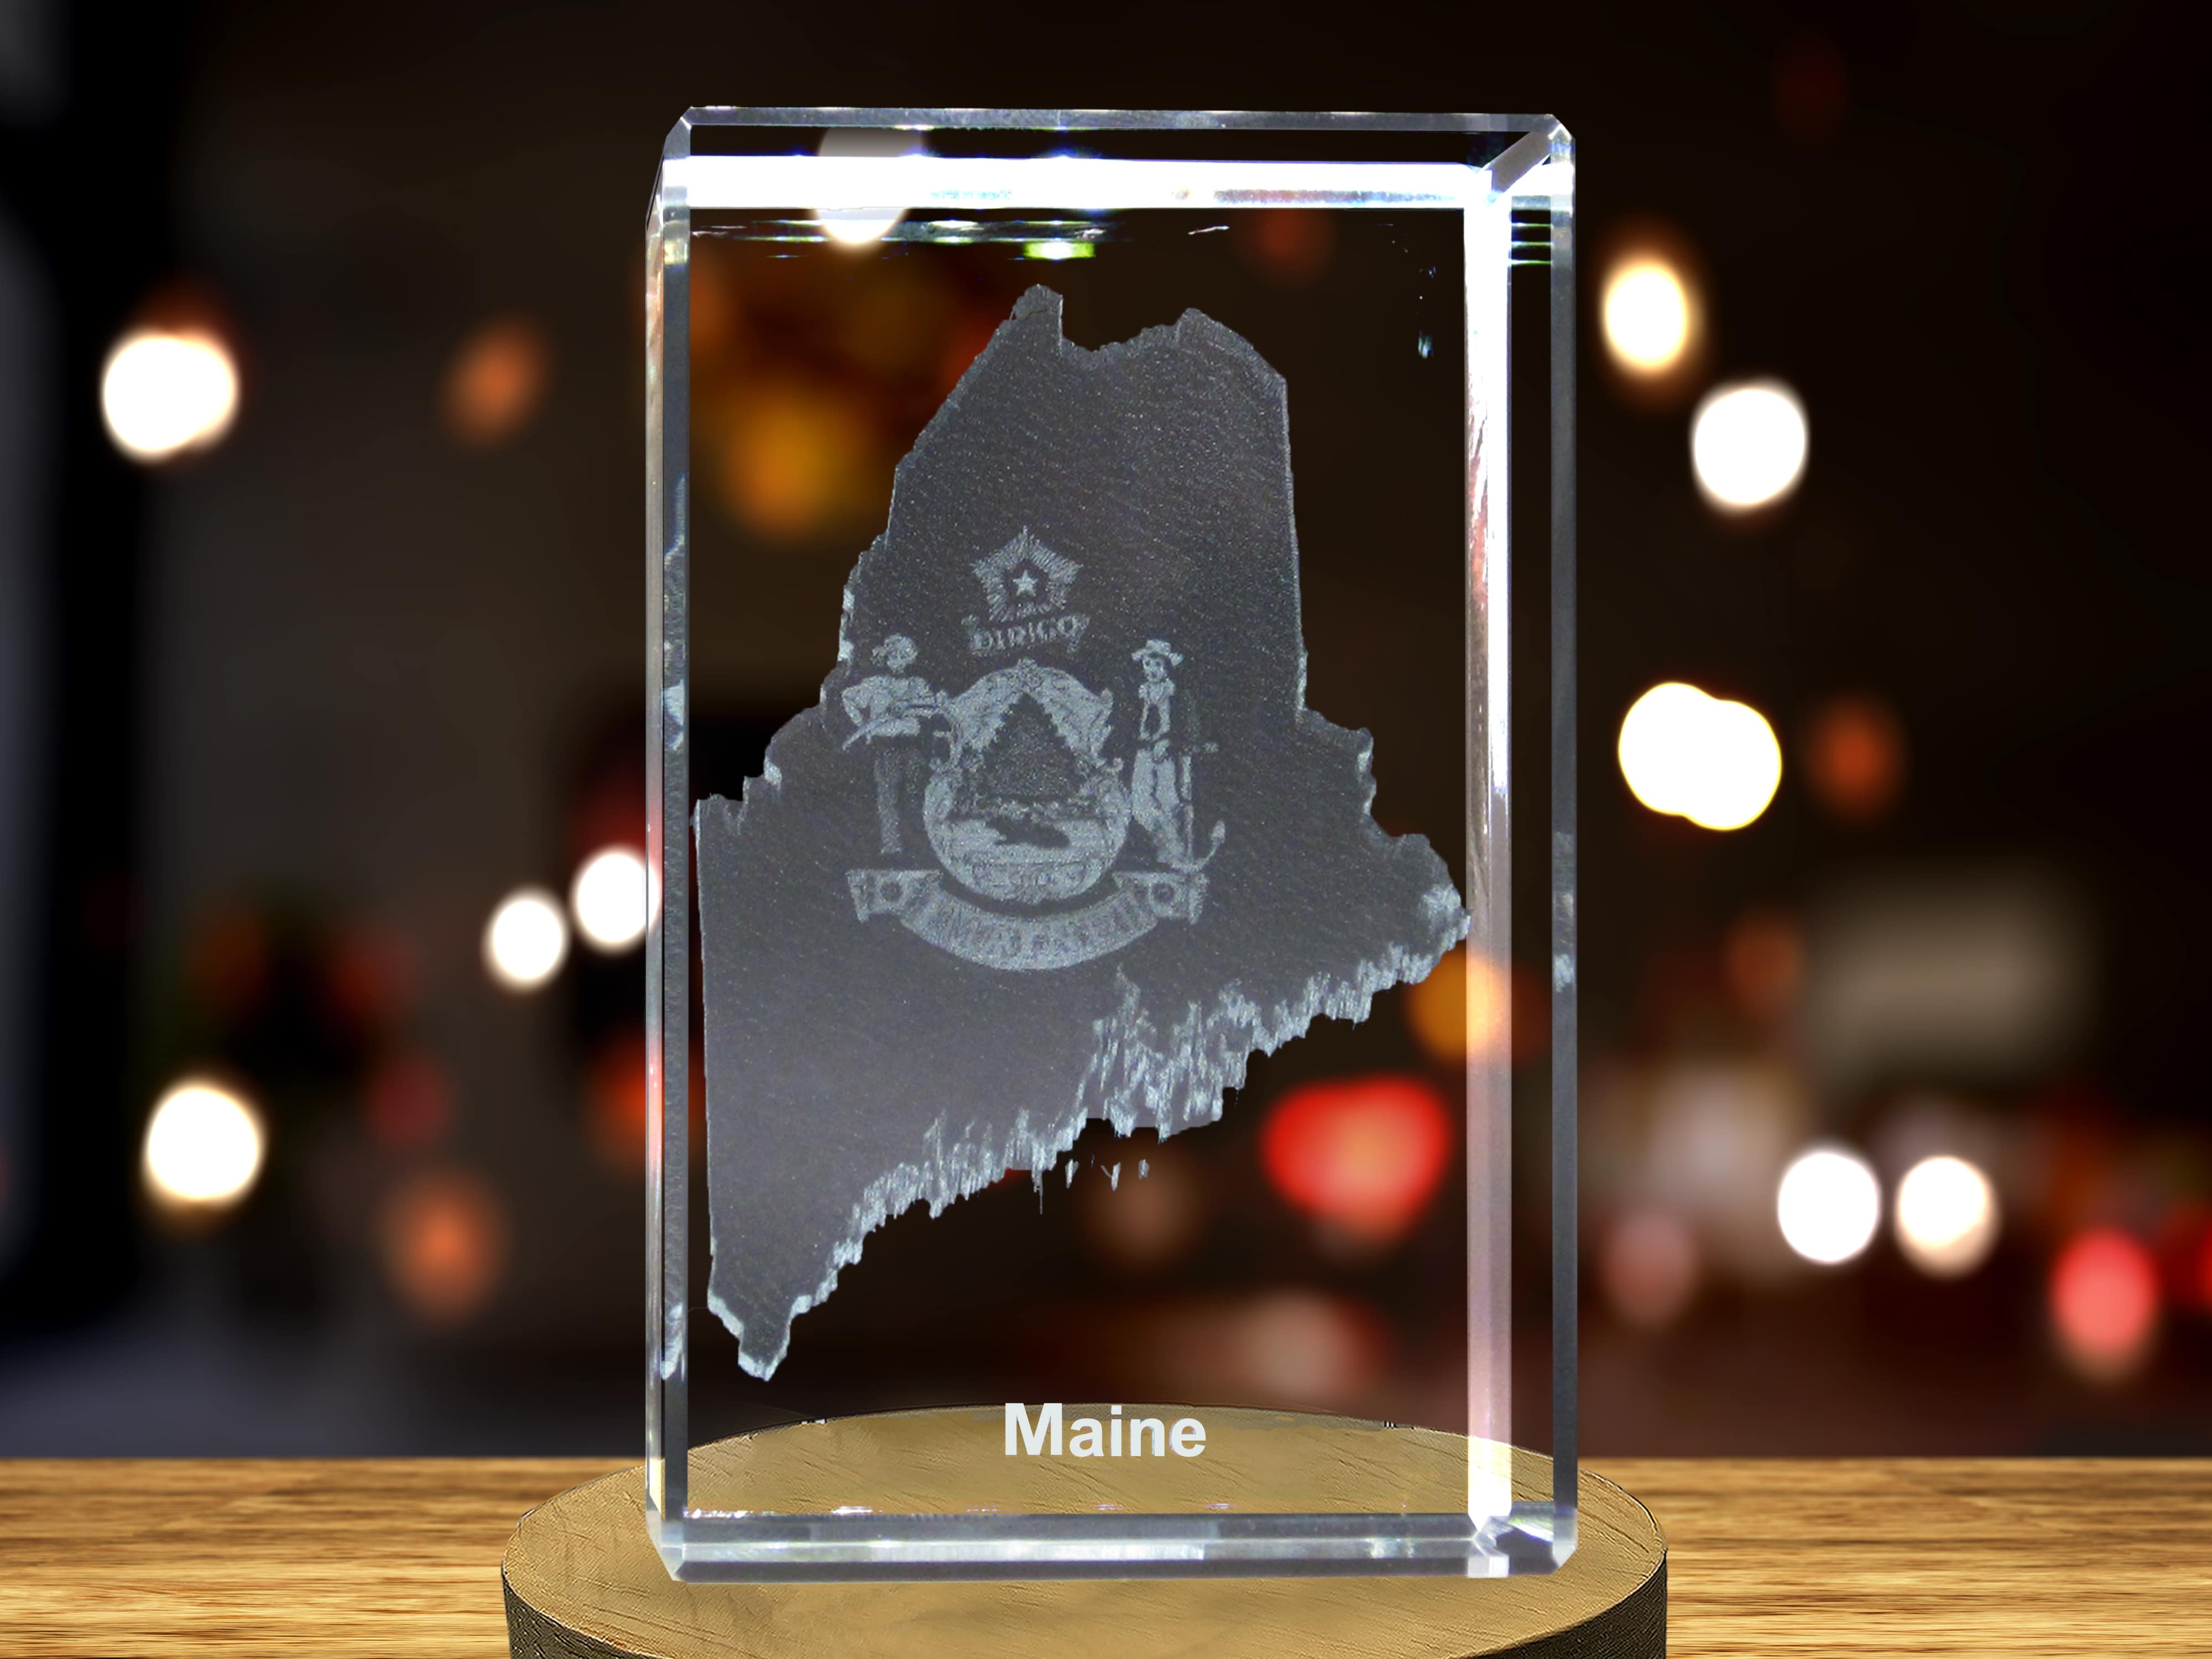 Maine 3D Engraved Crystal 3D Engraved Crystal Keepsake/Gift/Decor/Collectible/Souvenir A&B Crystal Collection